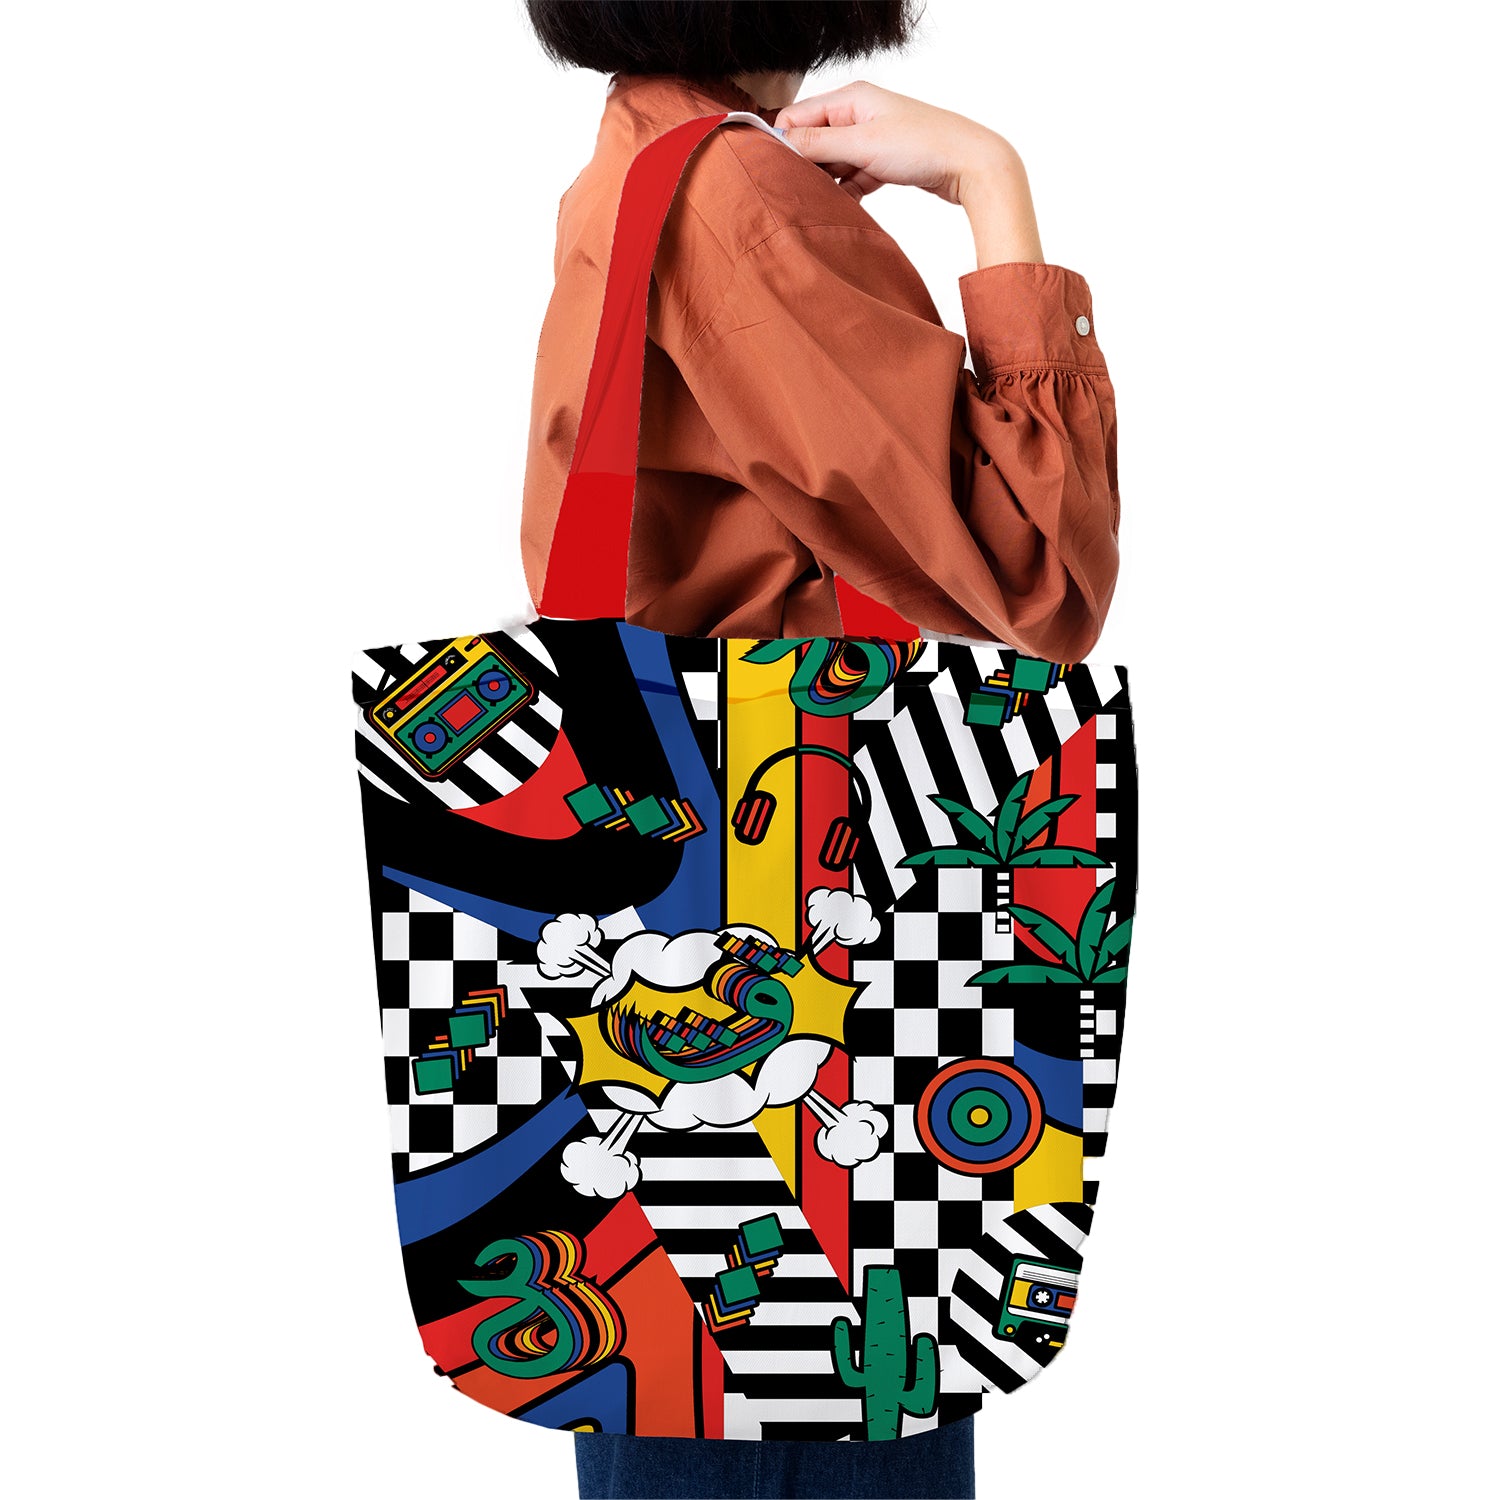 Kaf Women Curved Tote Bag - Multicolor -One Size